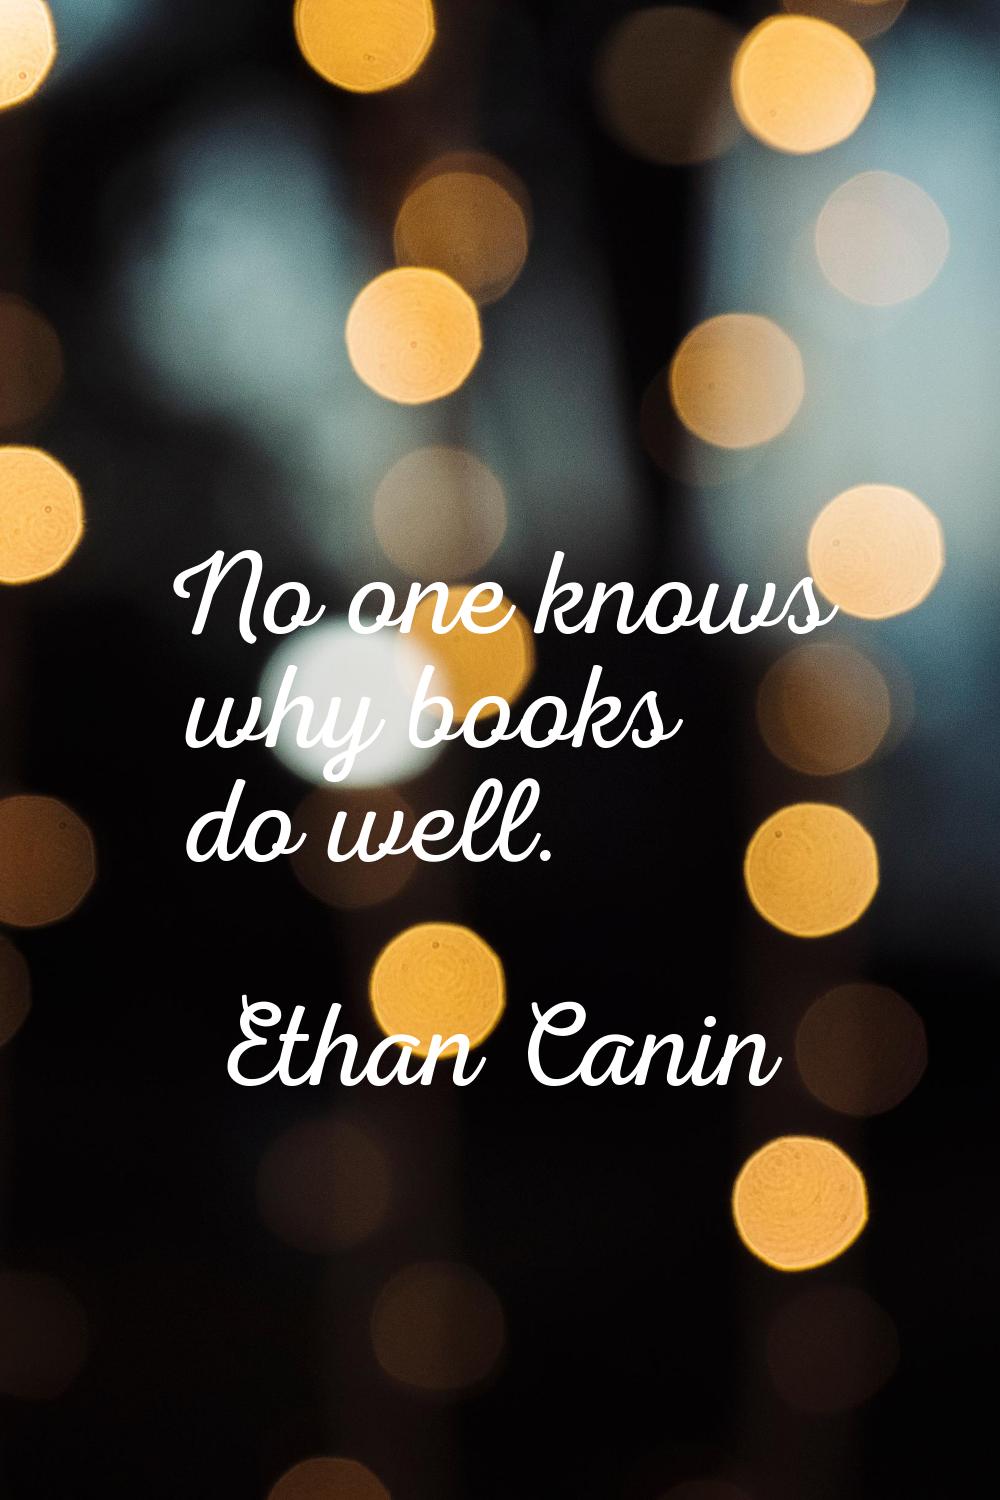 No one knows why books do well.